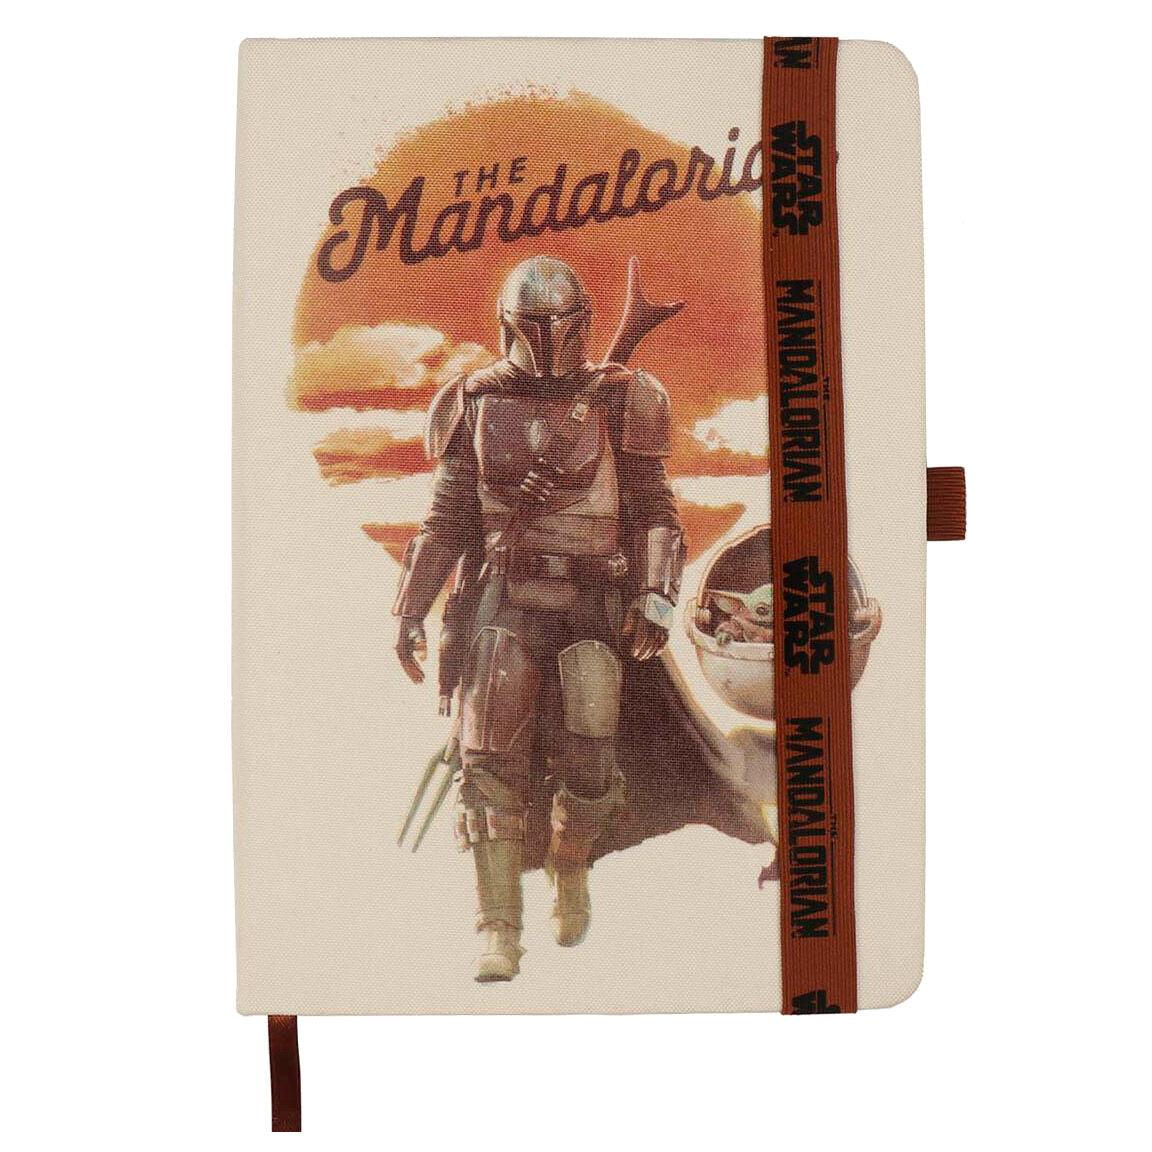 Stars Wars The Mandalorian Fan Collectable premium A5 notebook - Cerda - Ginga Toys